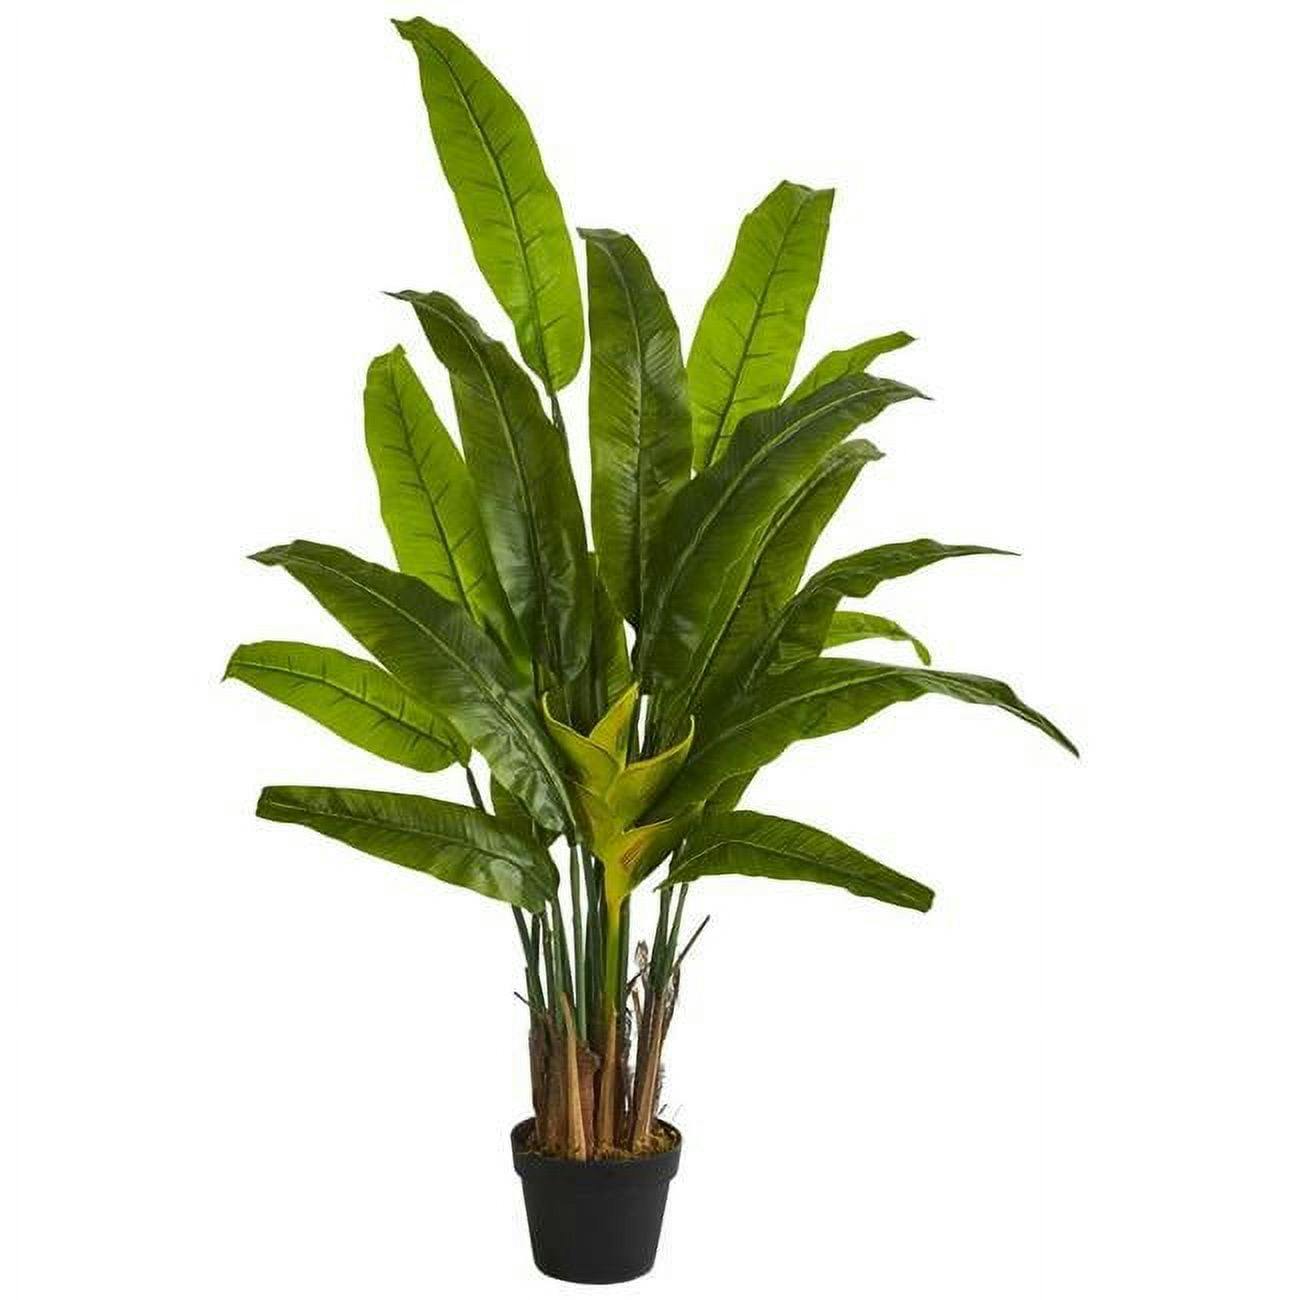 Lifelike Tropical 55" Palm Floor Plant with Pot in Green and Black